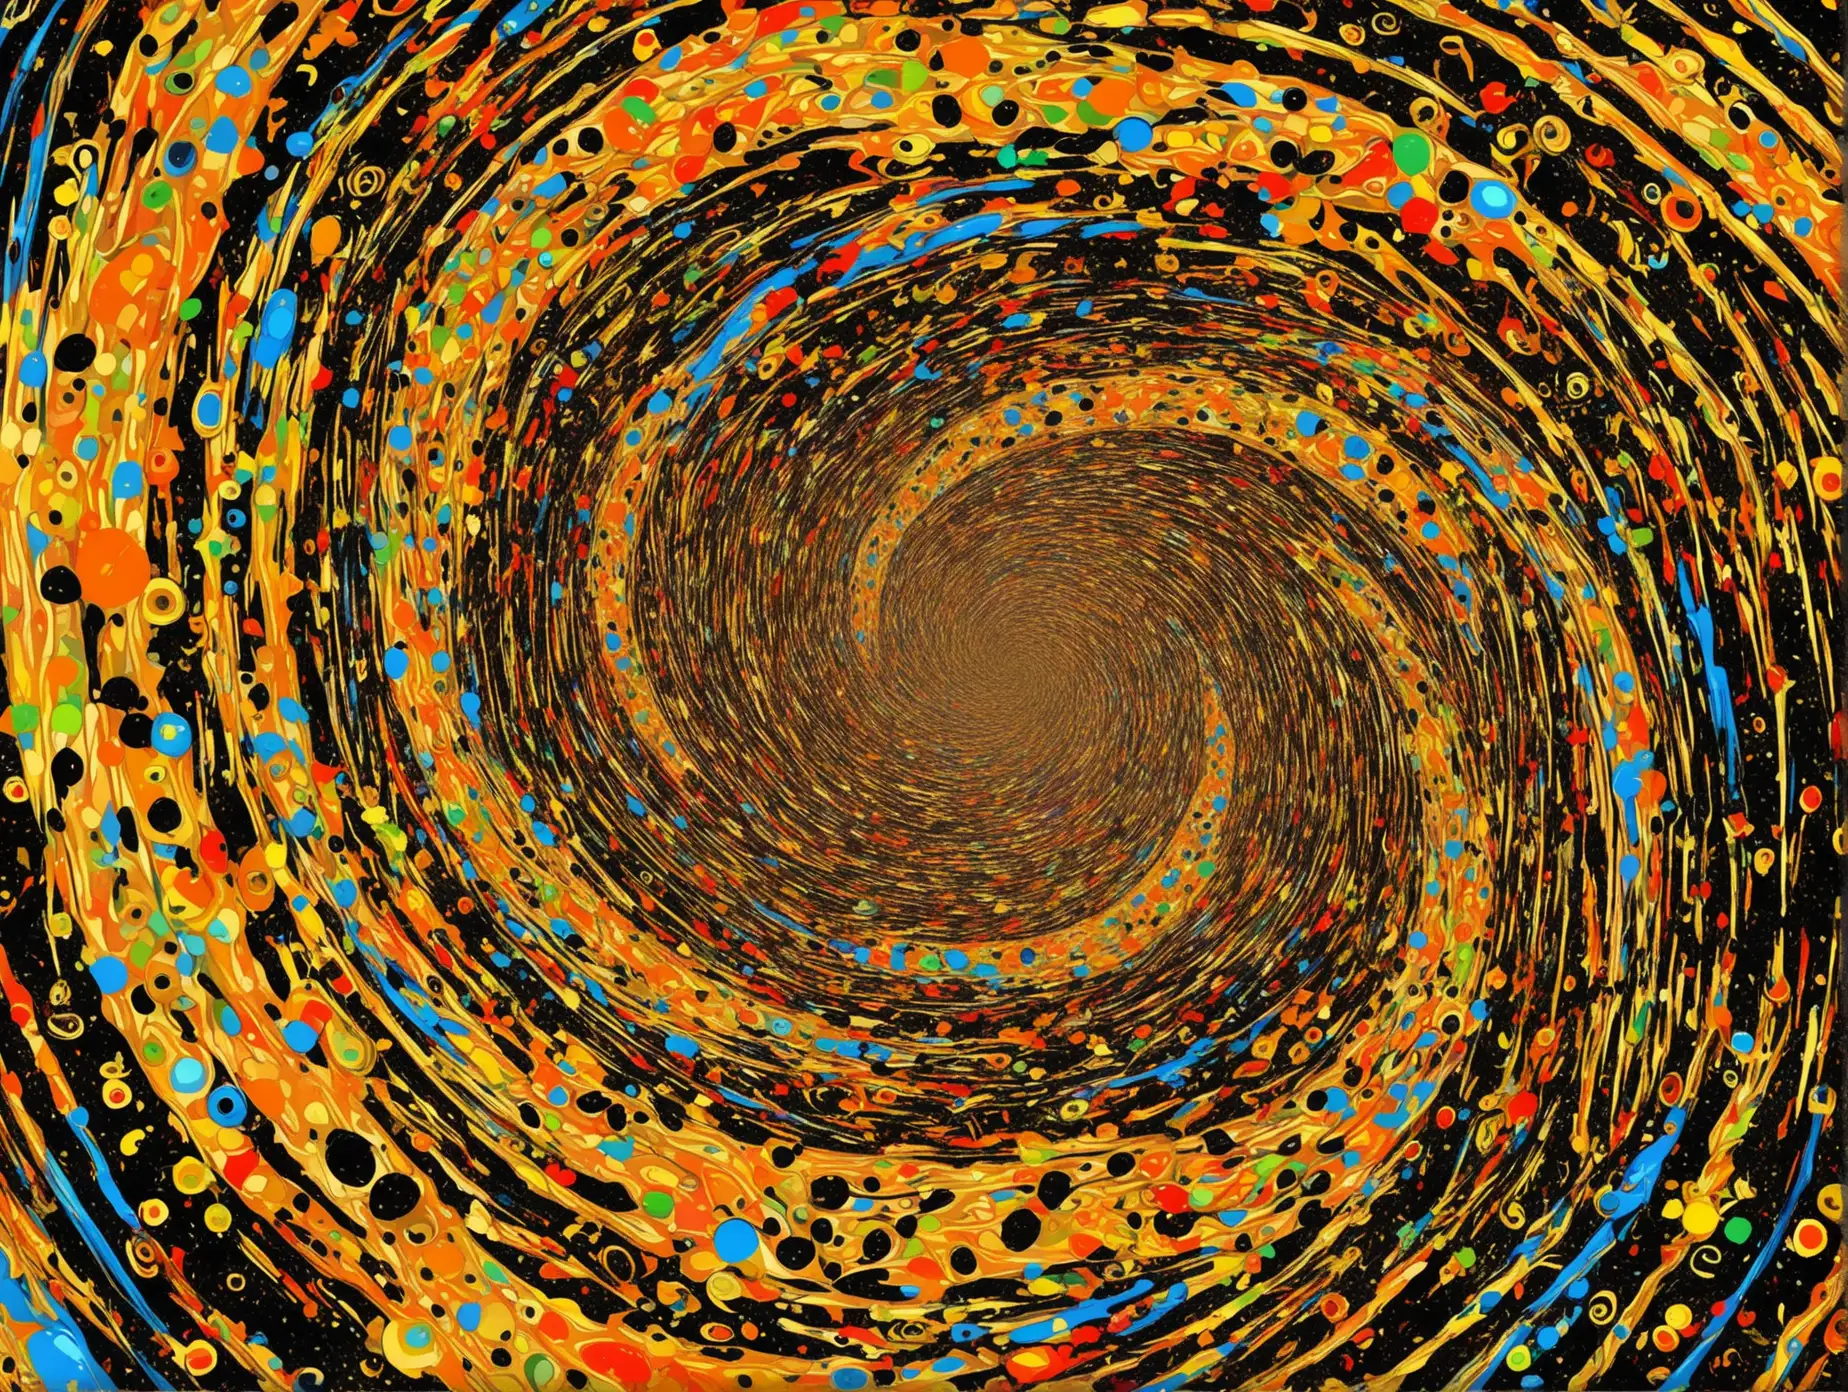 carrots  IN STYLE OF KUSTAZ KLIMT AND JACKSON POLLOCK PSYCHEDELIC, CRAZY BACKGROUND GOLD MESSY,    RIDES IN  big spiral lots o black
!





